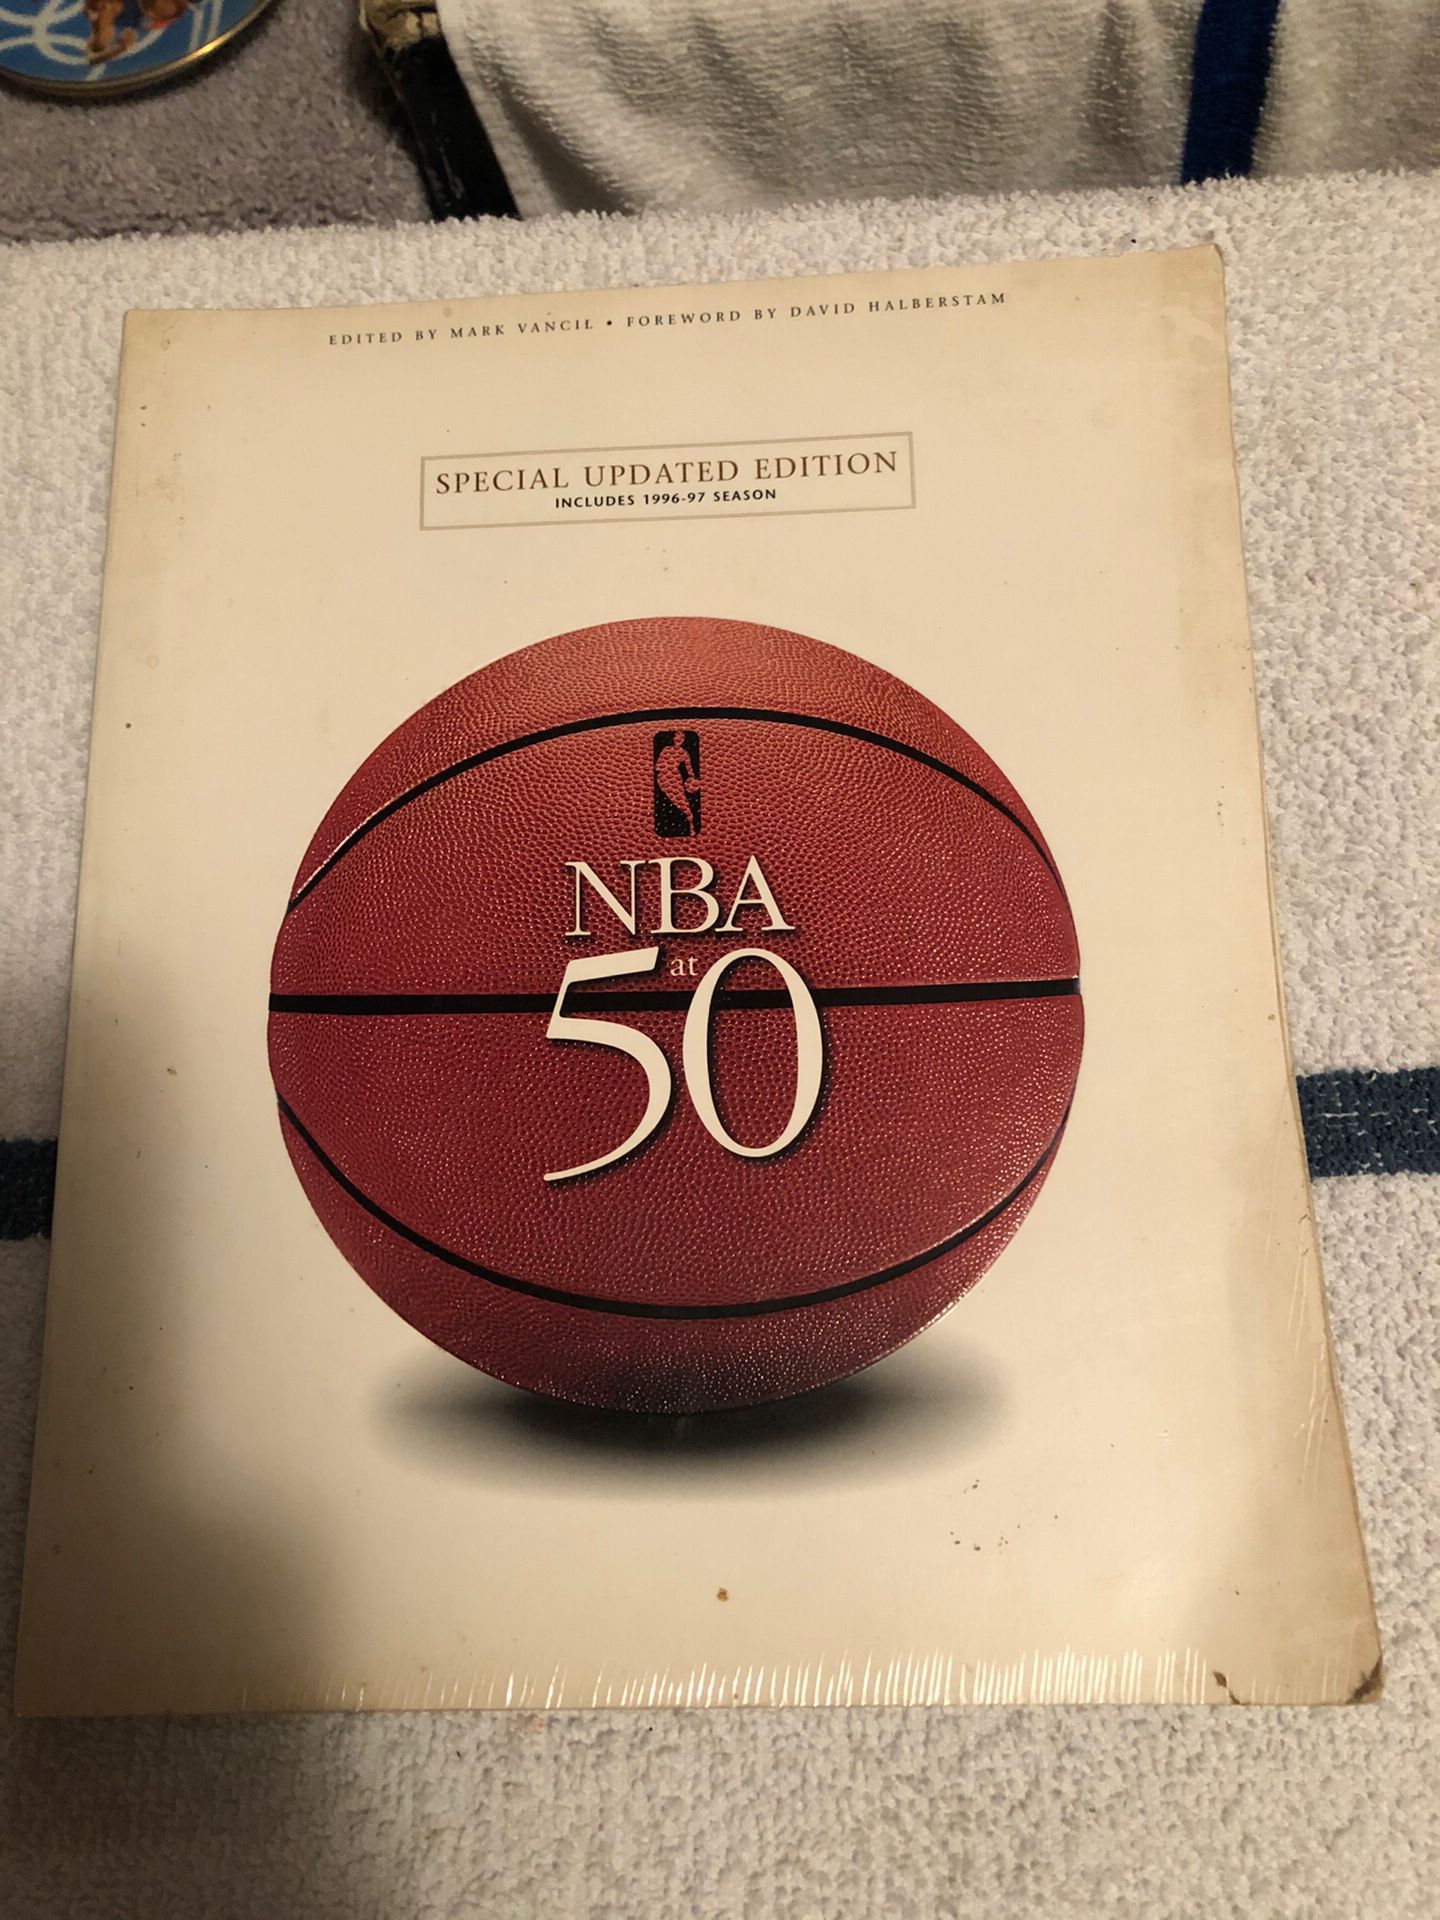 50th Anniversary Book of the NBA